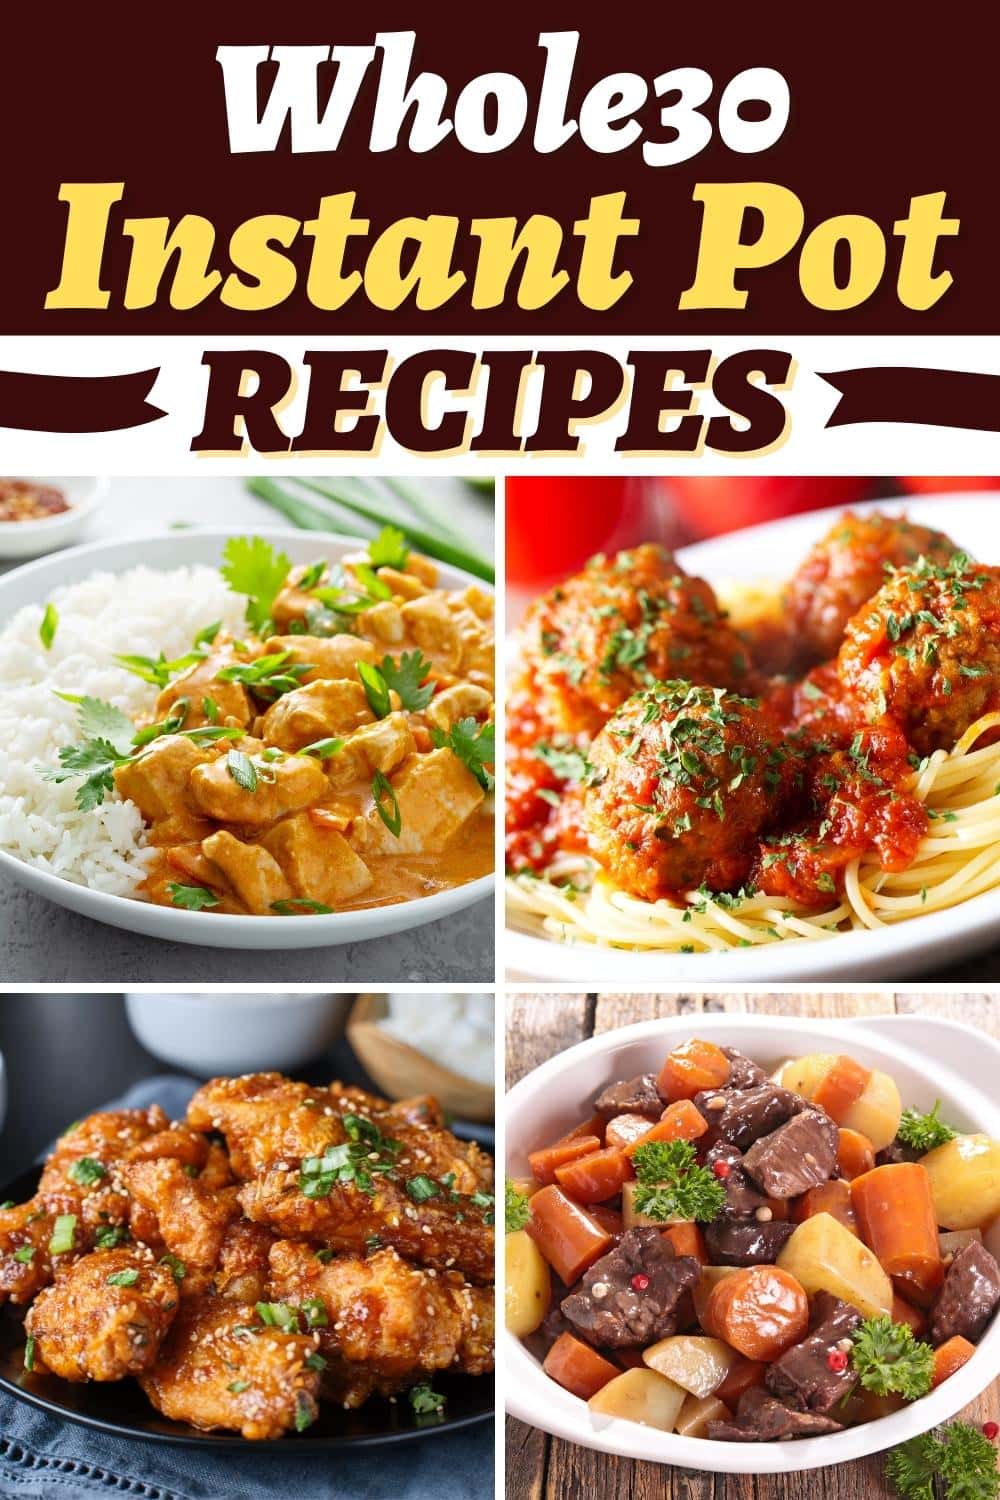 37 Best Whole30 Instant Pot Recipes - Insanely Good